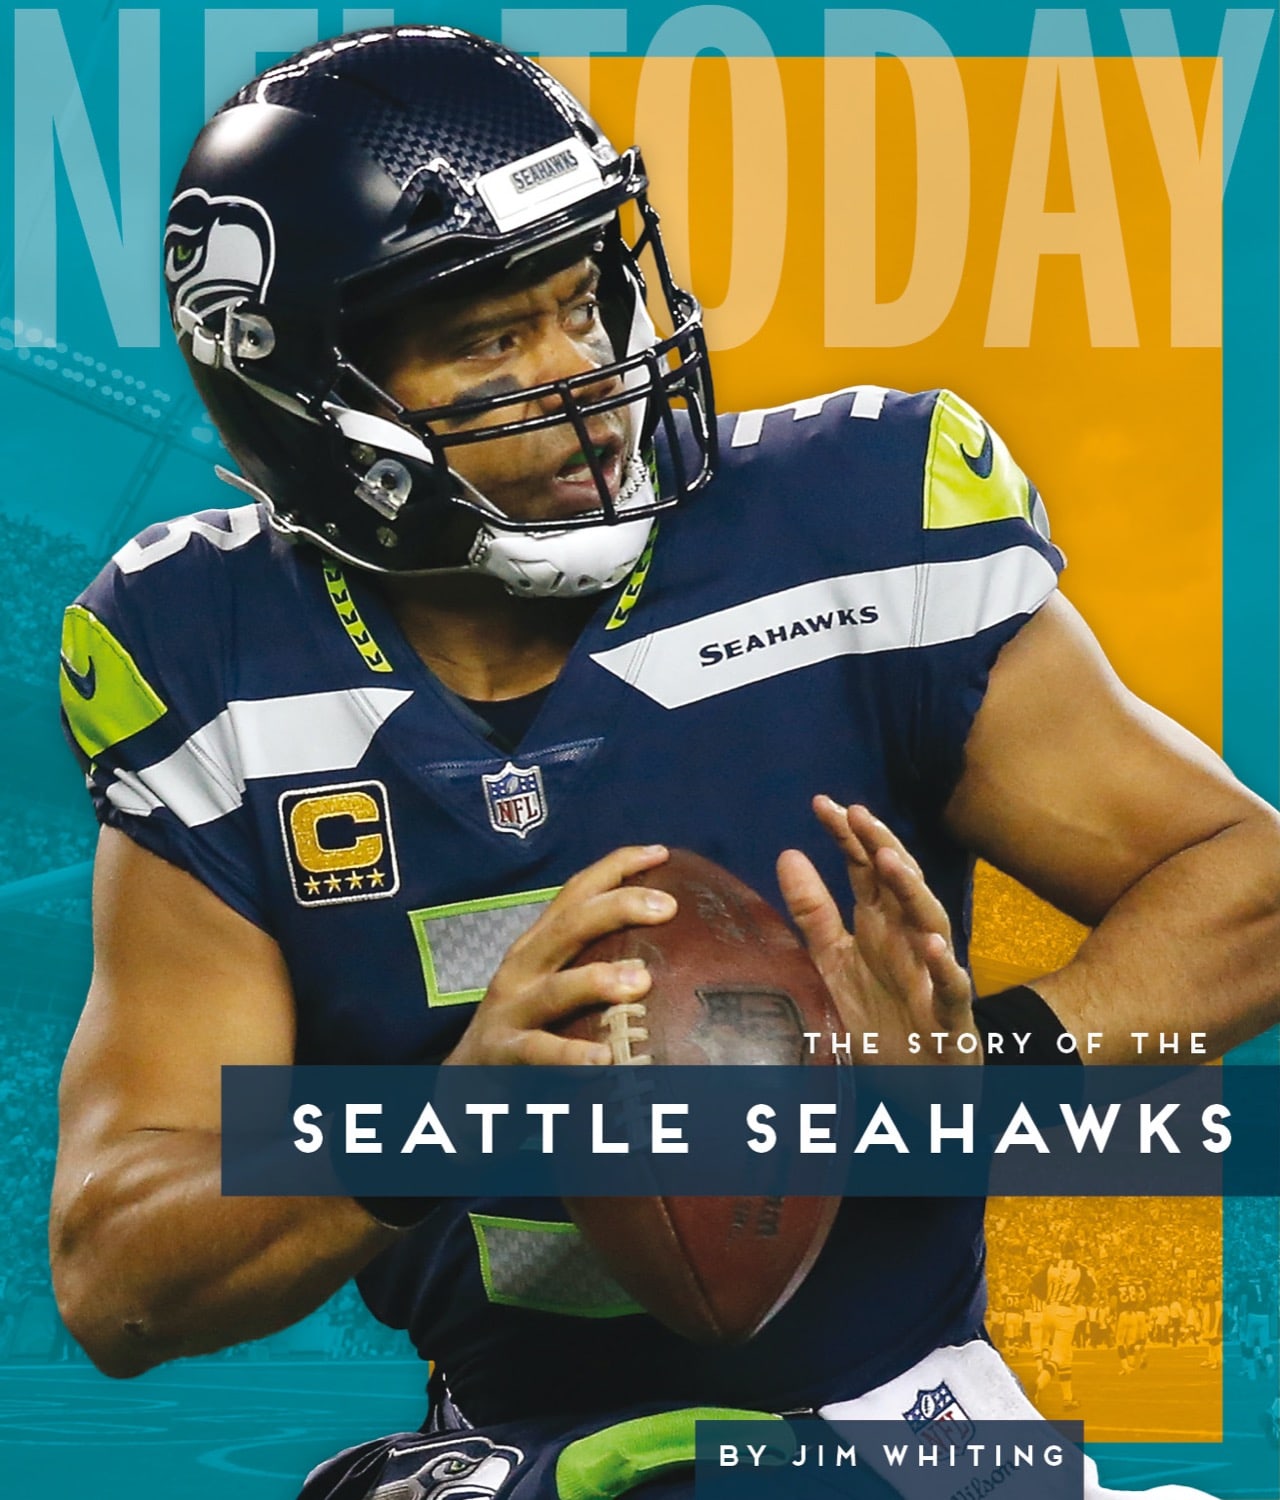 NFL Today: Seattle Seahawks